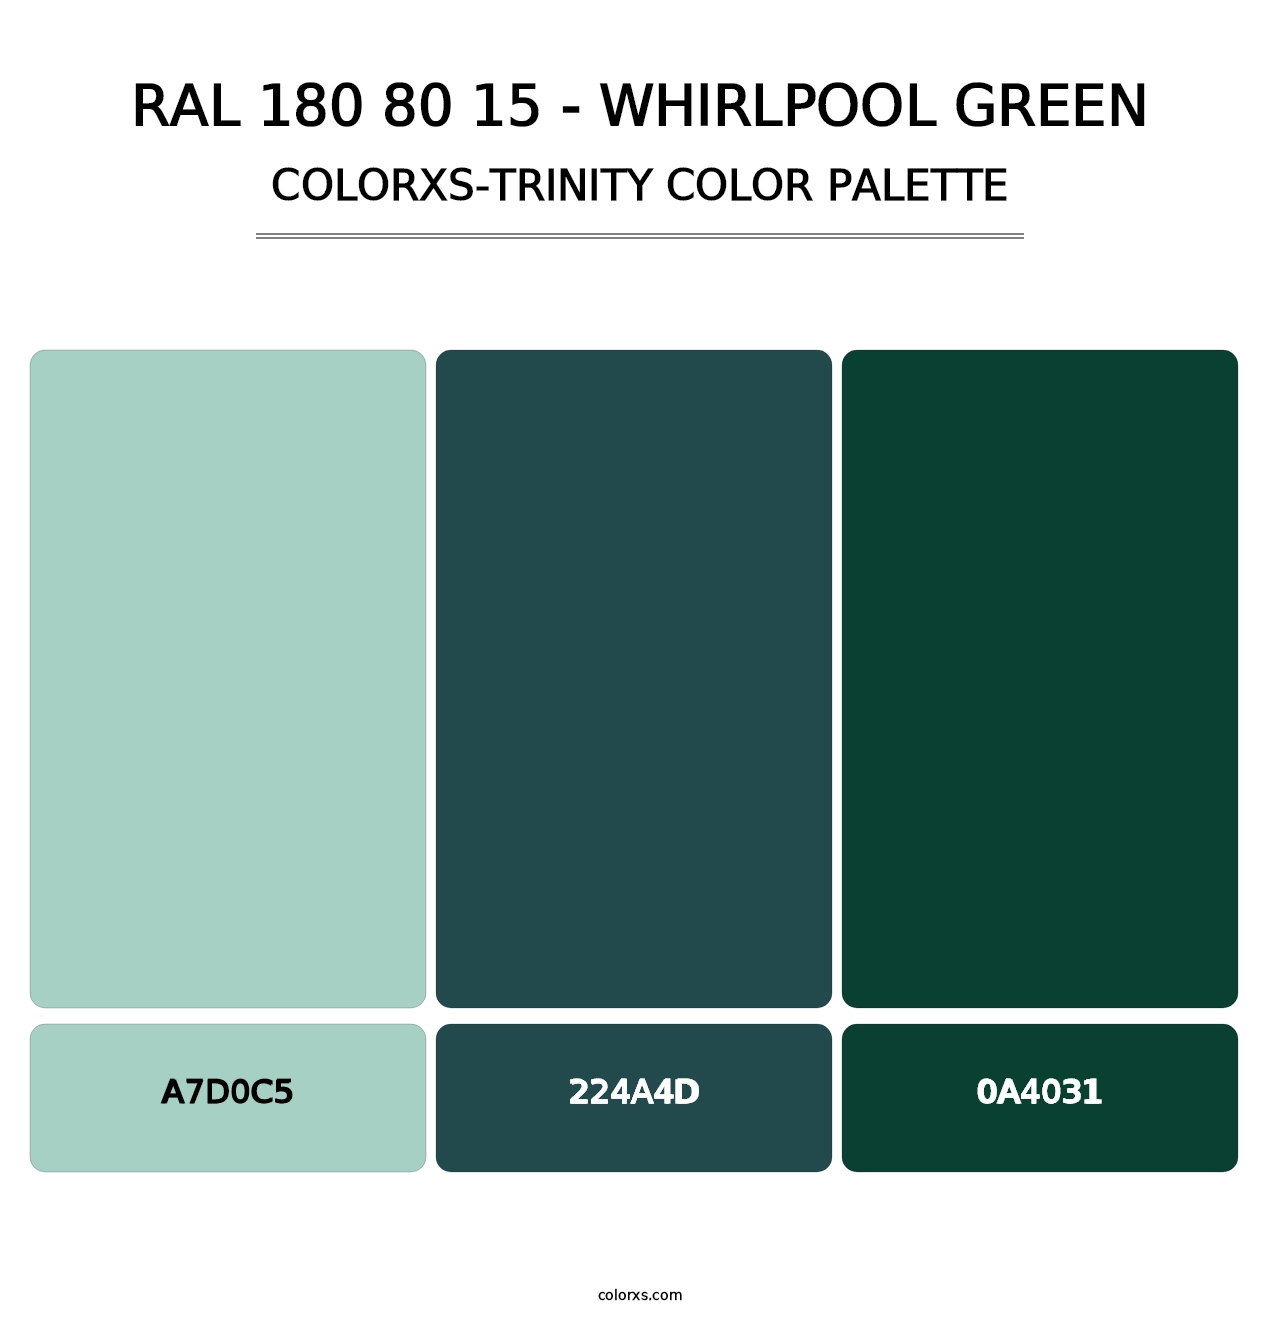 RAL 180 80 15 - Whirlpool Green - Colorxs Trinity Palette